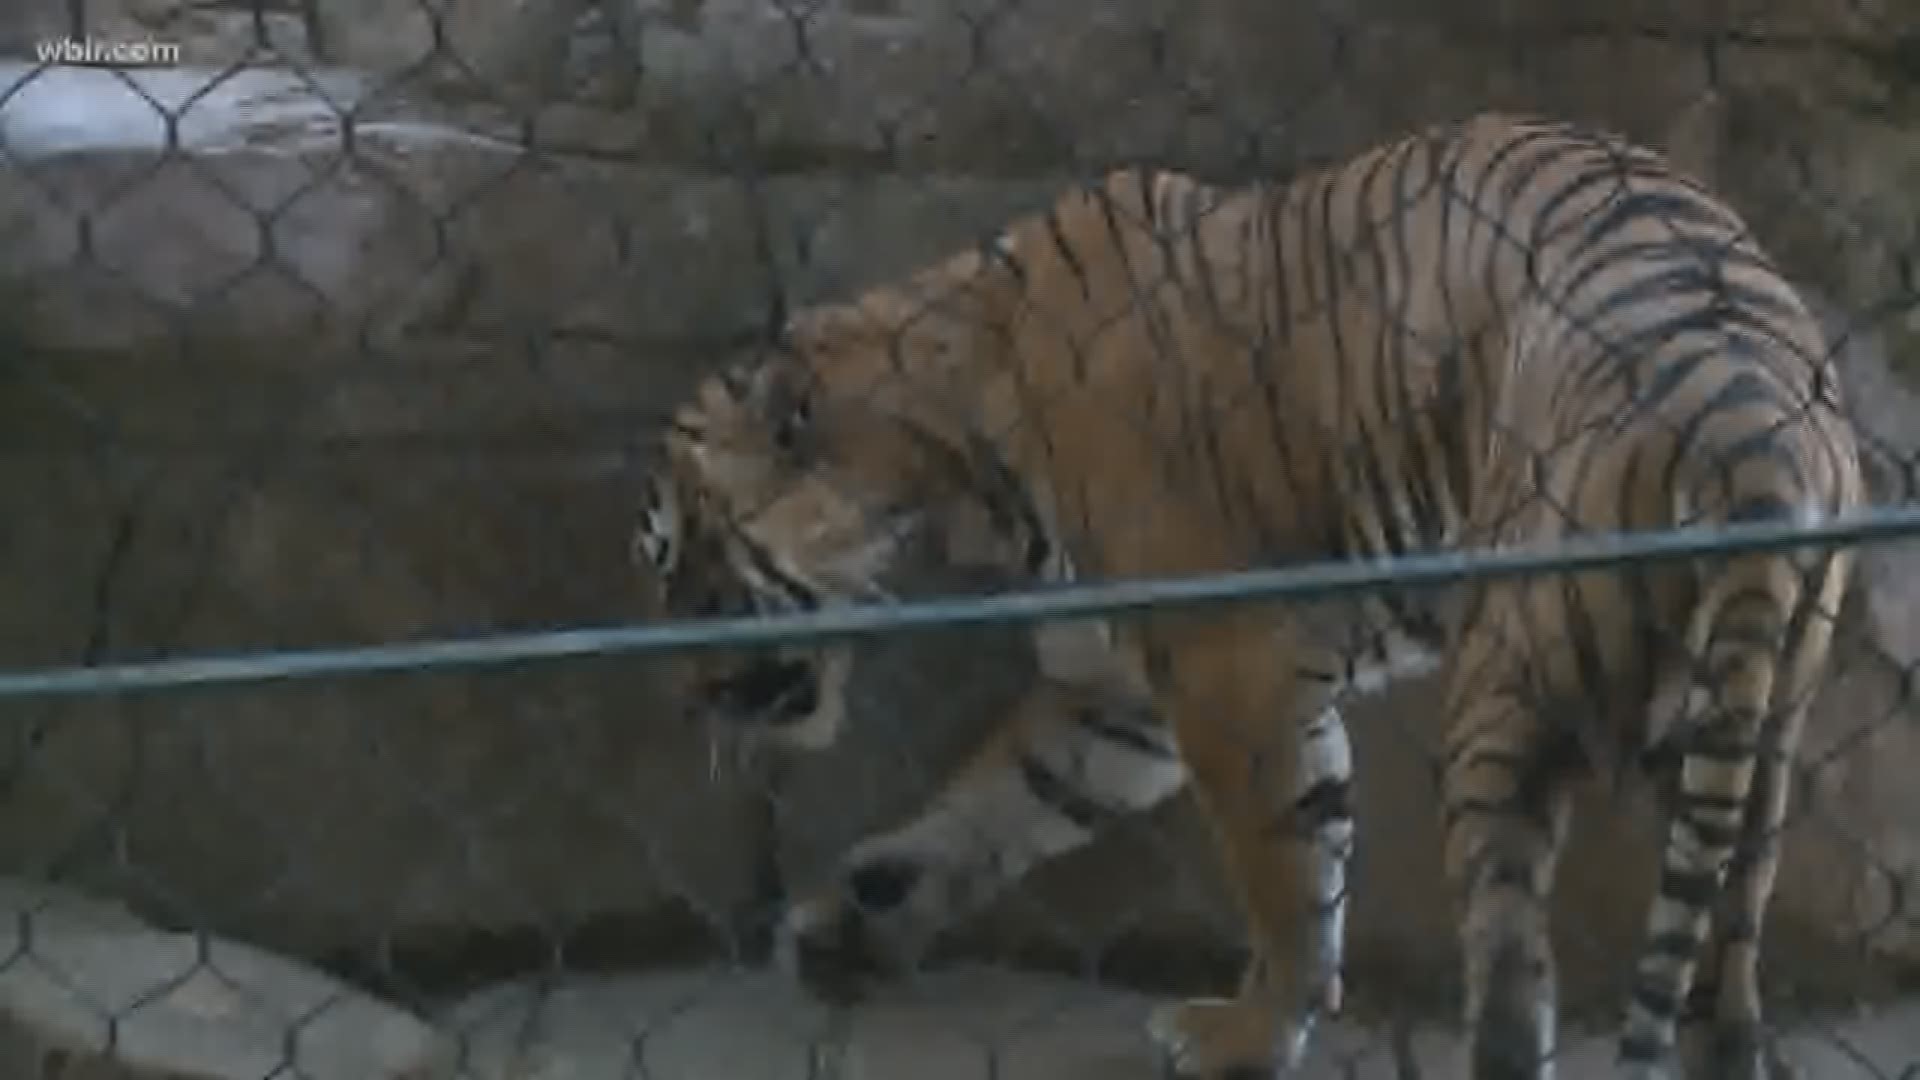 City leaders endorsed measures in the state legislature allowing that would allow Zoo Knoxville to sell alcohol.